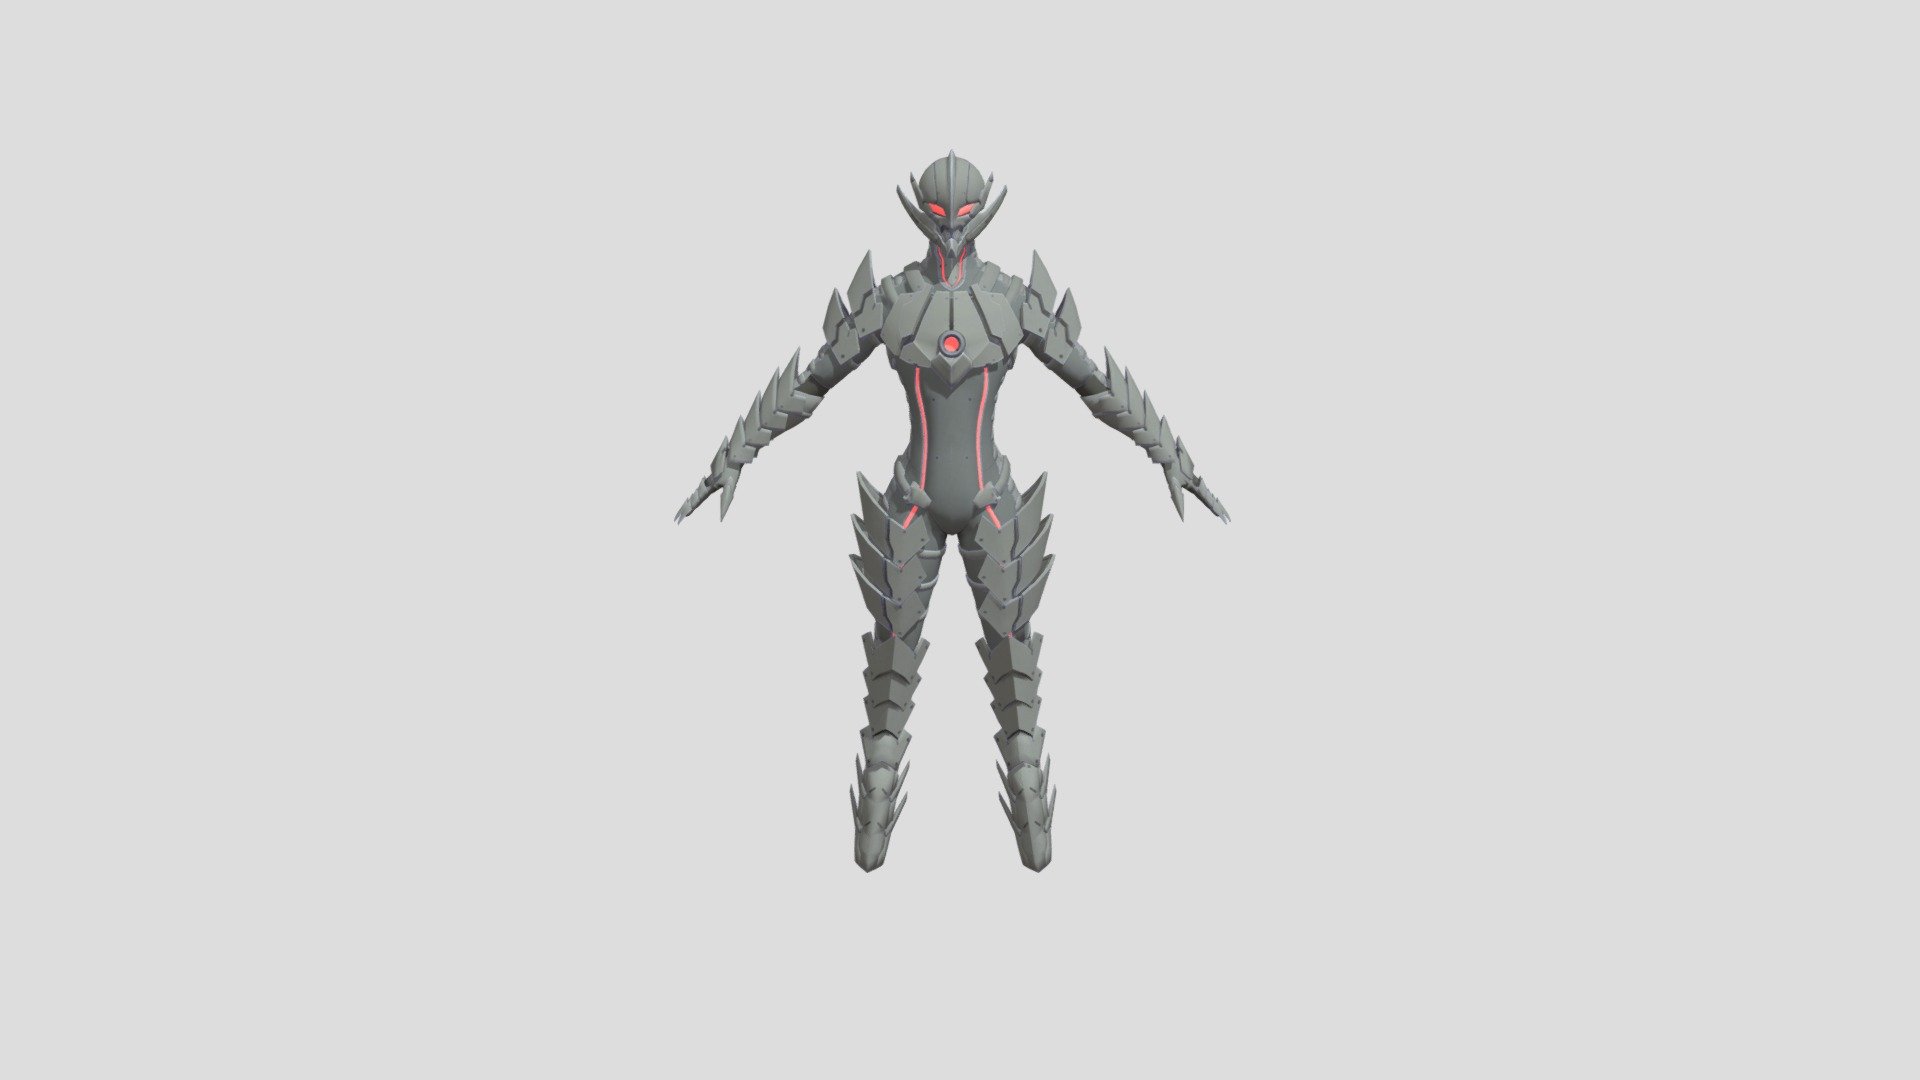 here is Bemular From Override 2 Ultraman Deluxe Edition Hope you guy like it

Disclaimer: I don’t own this model or the Ultraman Franchise or Override 2 they Belong to Tsuburaya Productions Netflix and Modus Studios Brazil (formerly The Balance, Inc.) and published by Modus Games Please Support The Official Release 3d model